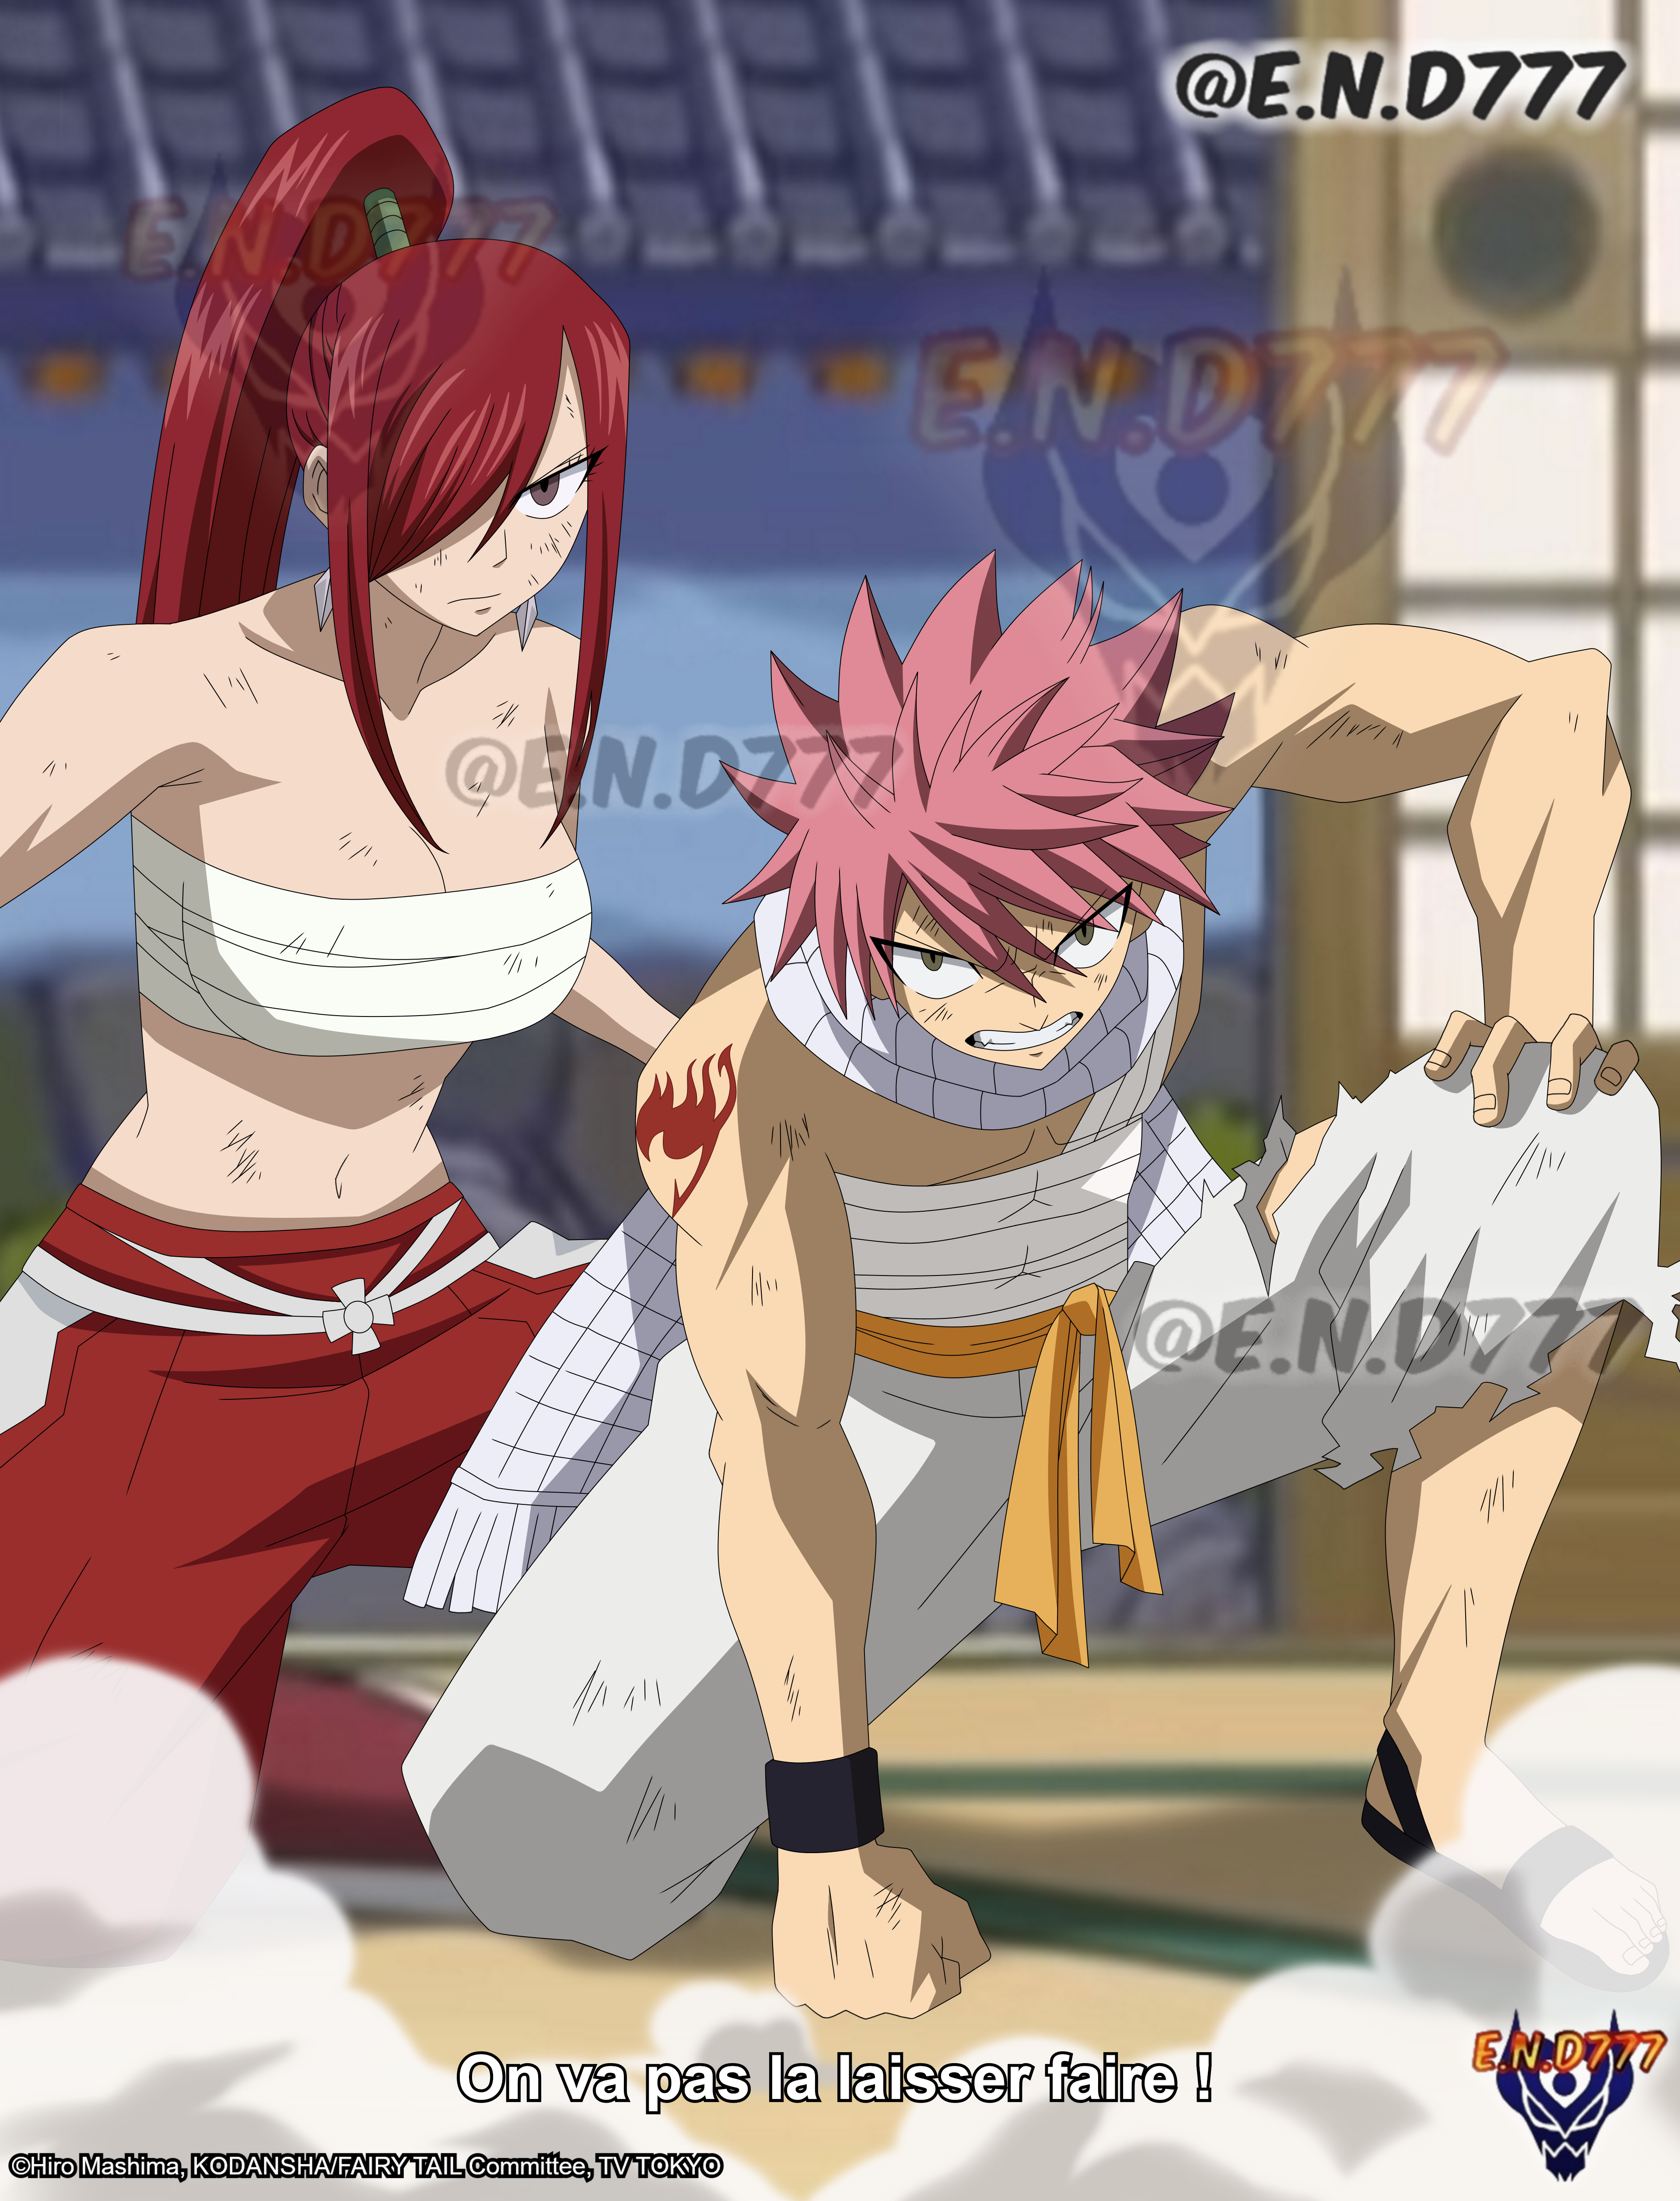 Fairy Tail 100 Years Quest 85 Natsu and Erza by END7777 on DeviantArt